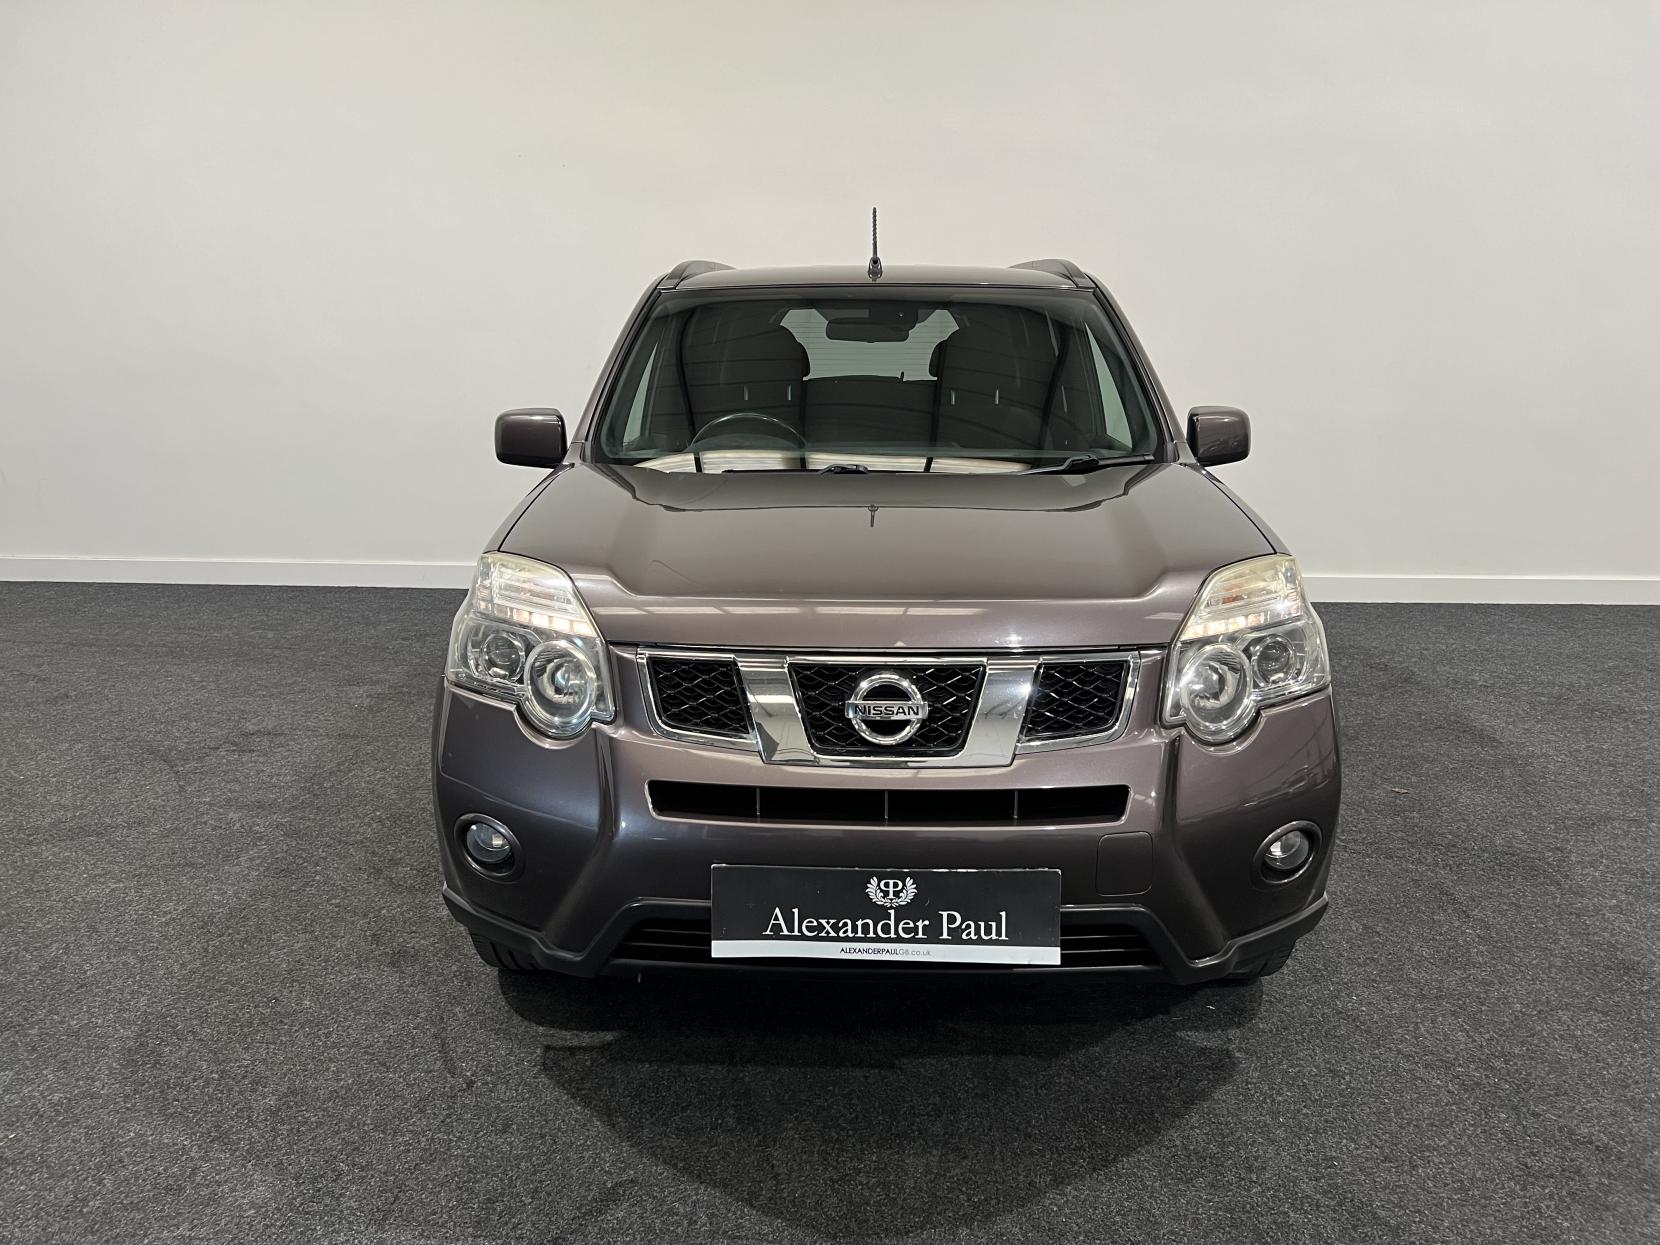 Nissan X-Trail 2.0 dCi Acenta SUV 5dr Diesel Manual 4WD Euro 5 (173 ps)